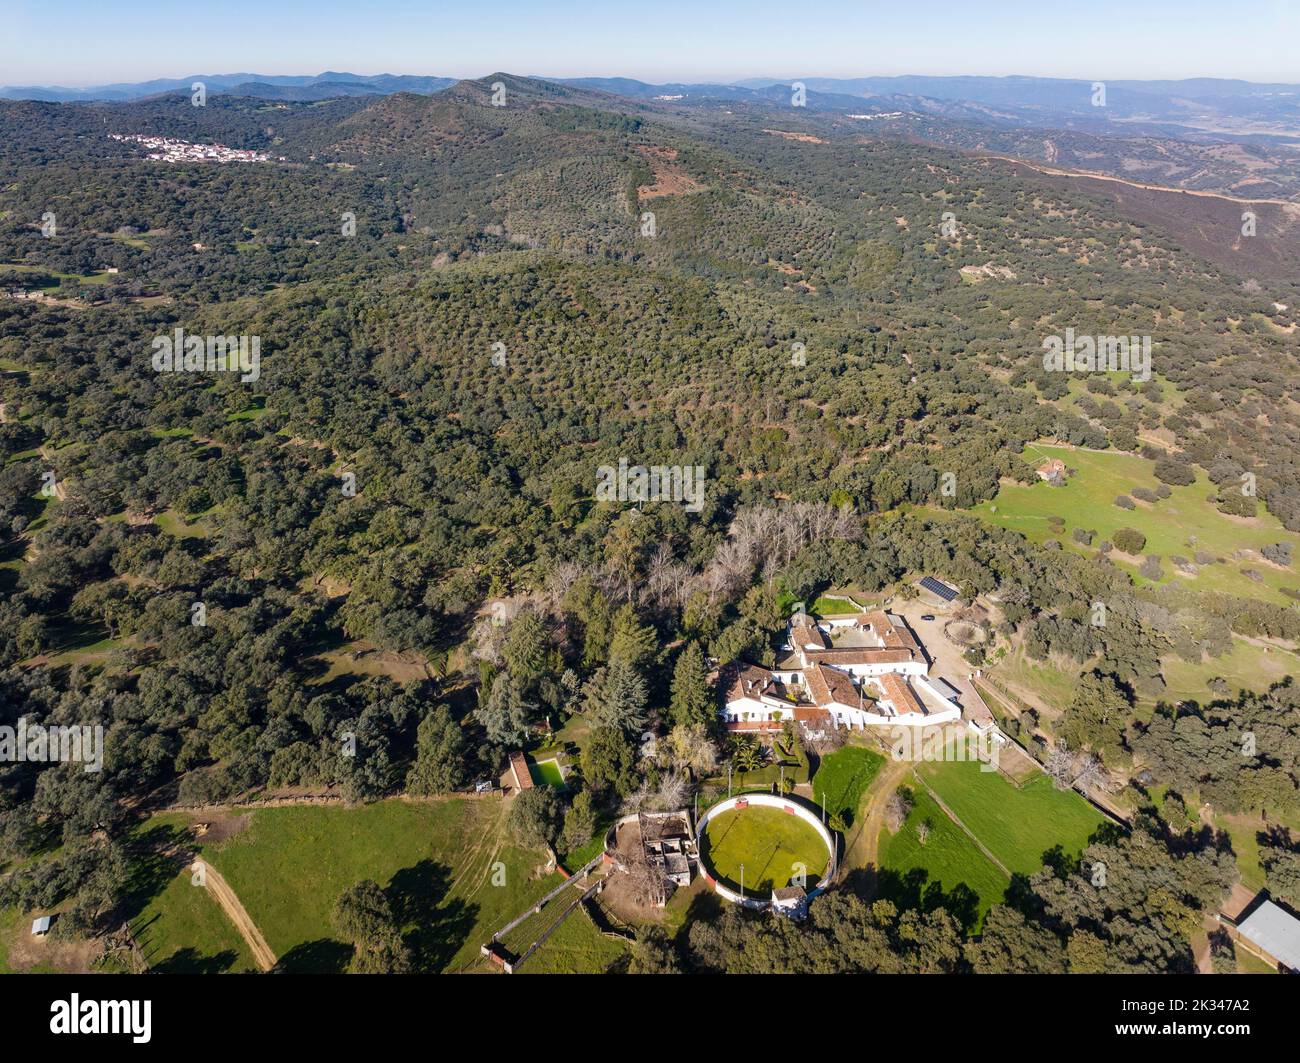 Country estate with own bullring in the Sierra de Aracena. aerial view, drone shot, Huelva province, Andalusia, Spain Stock Photo